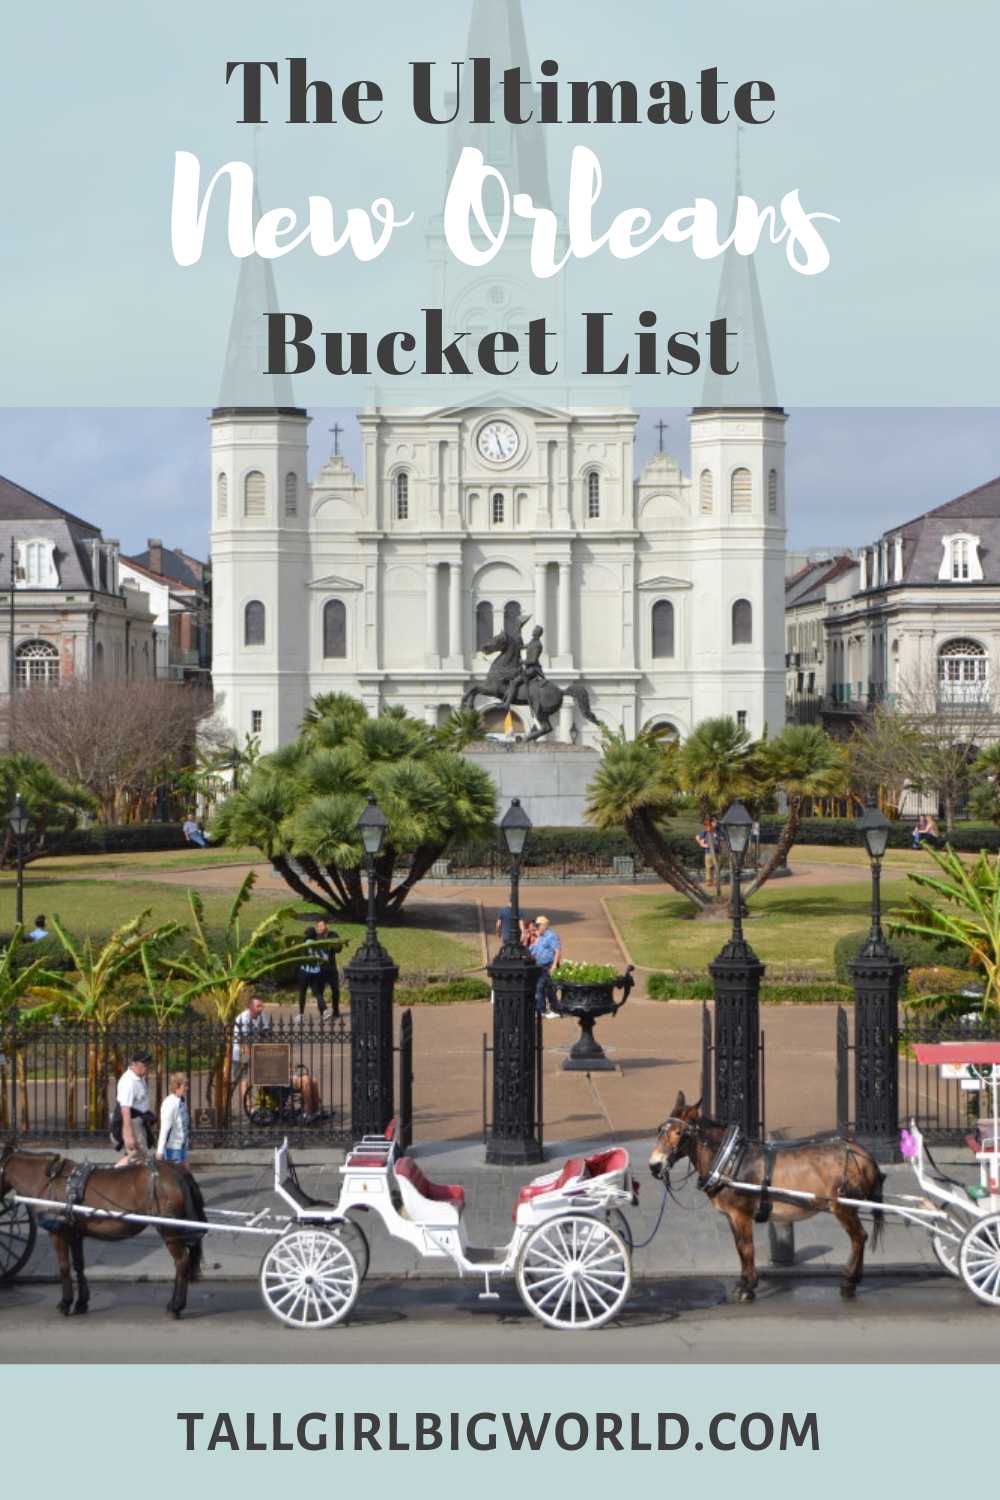 New Orleans, NOLA, The Big Easy. Whatever you call it, you'll have an amazing time if you check off all the items on this epic New Orleans Bucket List! #bucketlist #neworleans #NOLA #Louisiana #deepsouth #USA #USTravel #travel #traveltips #traveling